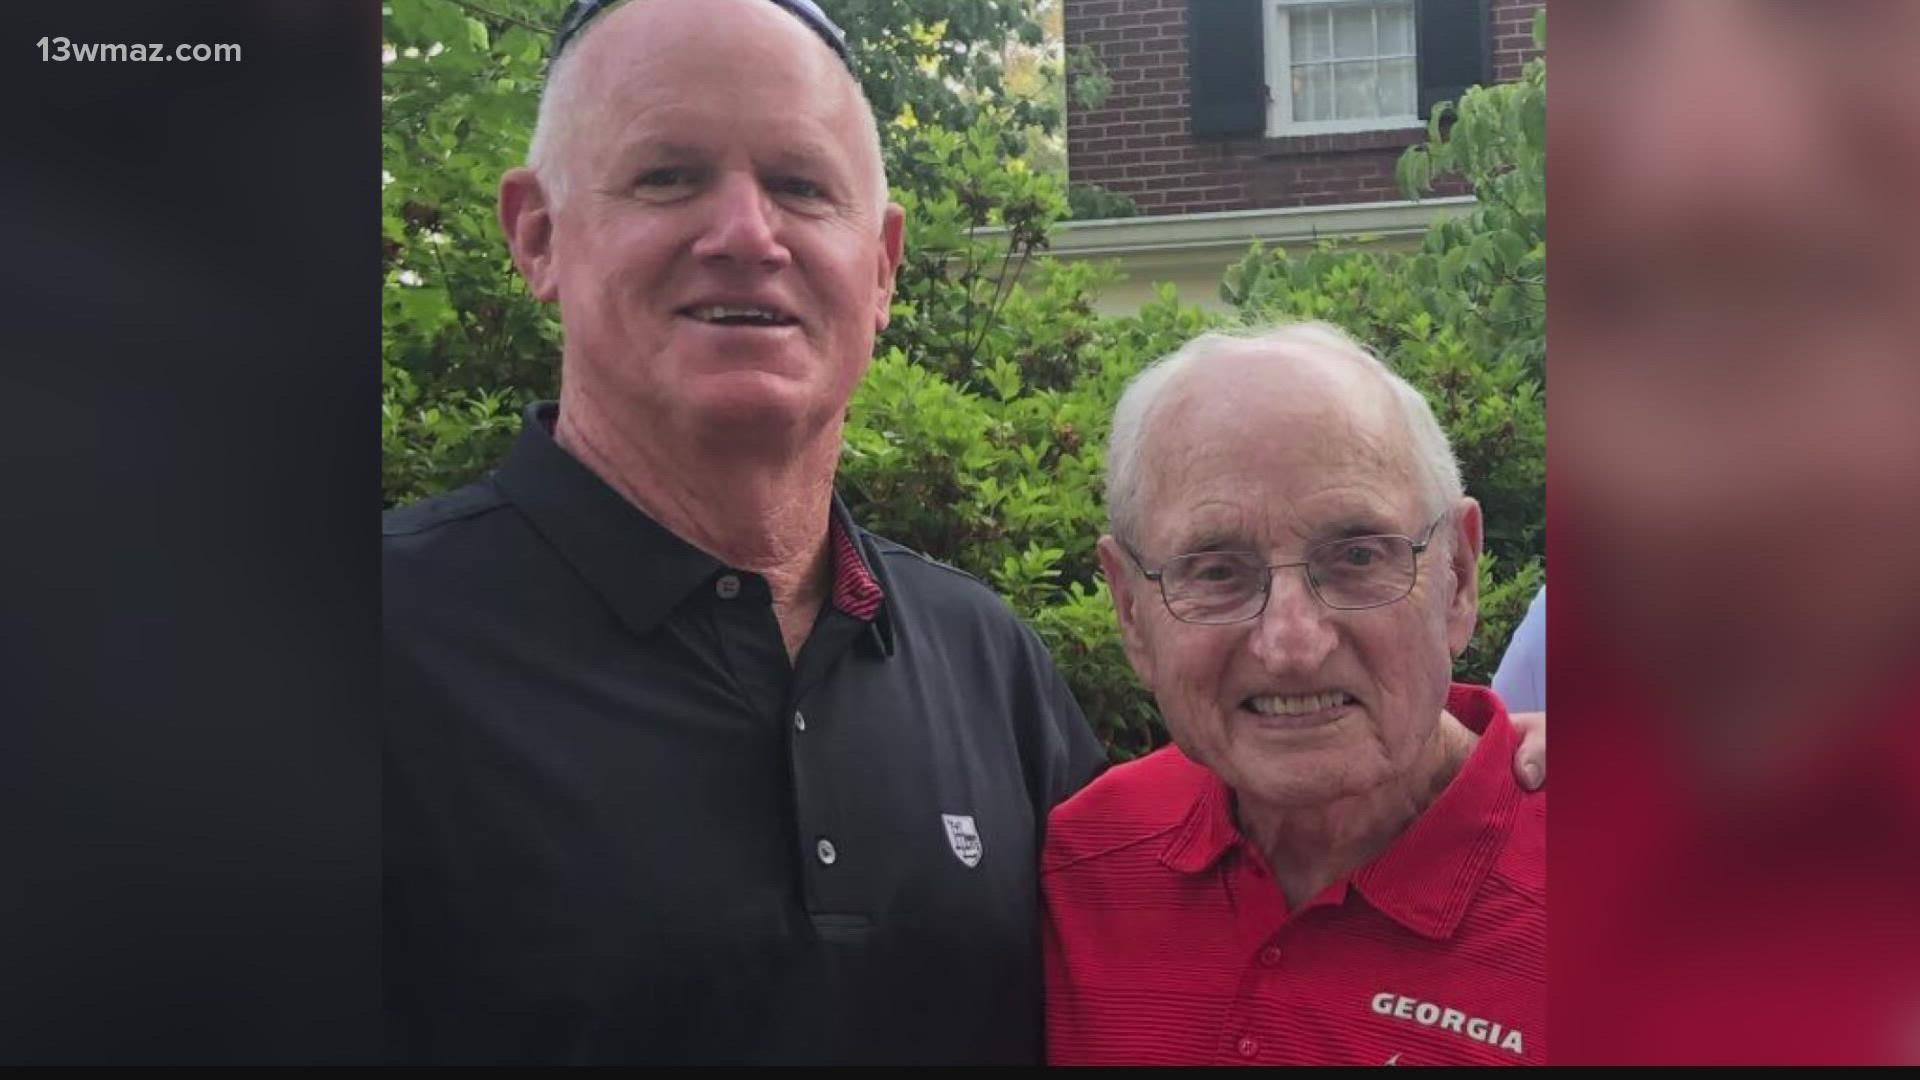 Collins helped win an SEC championship with Coach Dooley back in 1976, one of Dooley's six.